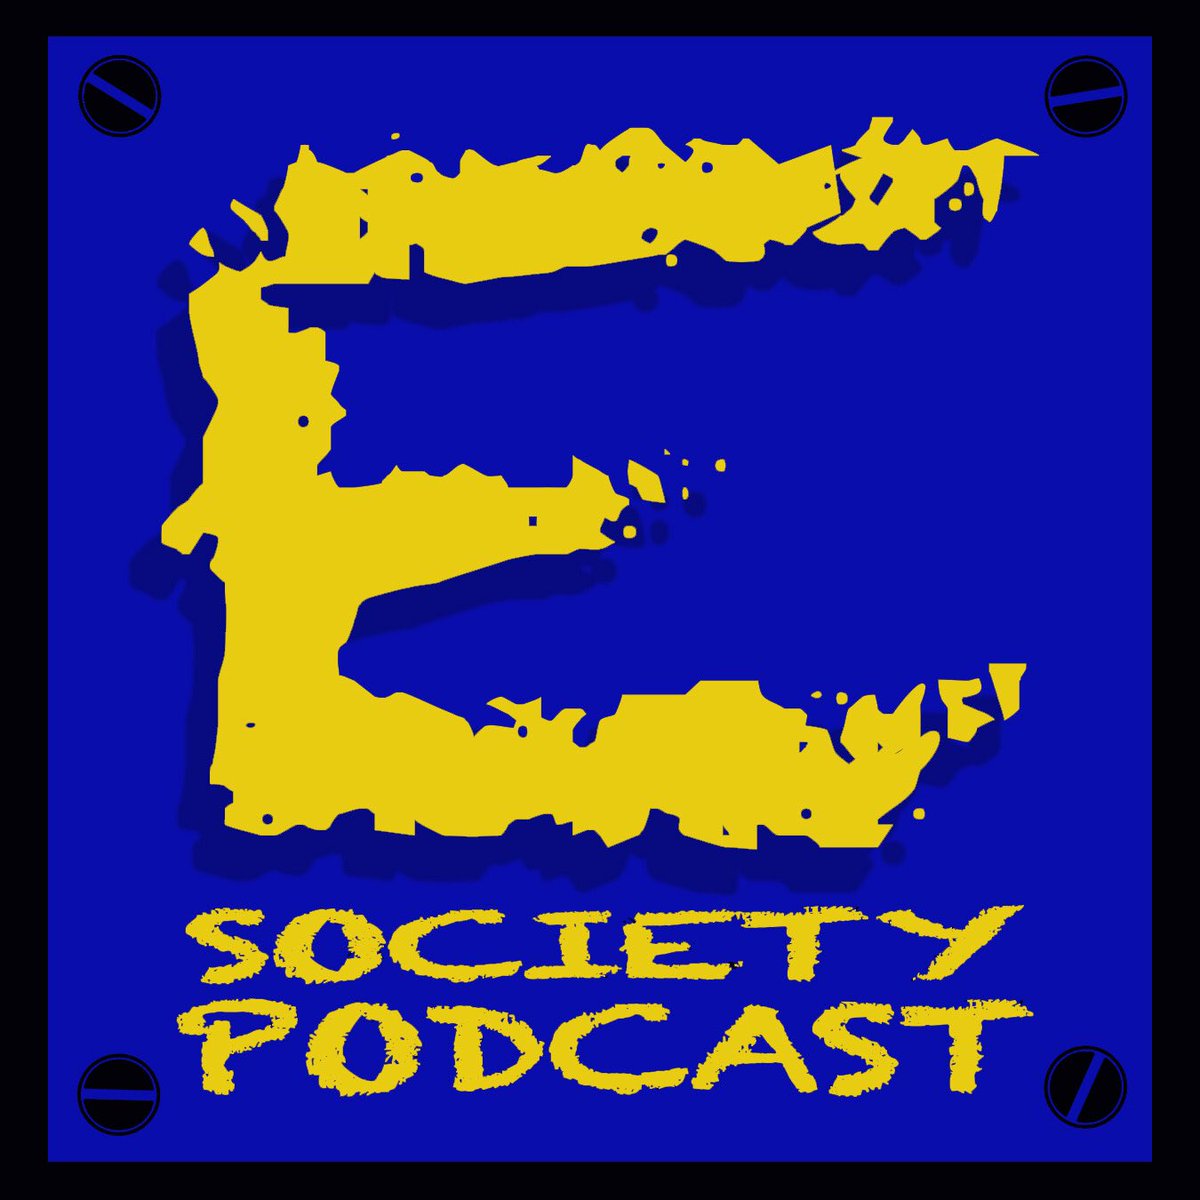 E Society Podcast - Ep. #310: Star Wars Day In The Bay Is Now Available At podbean.com/pu/pbblog-p3n5…. #SK8ERNezPodcastNetwork #ESociety #ESP #Movies #TVShows #Toys #Collectibles #Funko #StarWars #Music #Entertainment #Podcast #Podcasting #PodLife #PodernFamily #PodcastHQ #PodNation